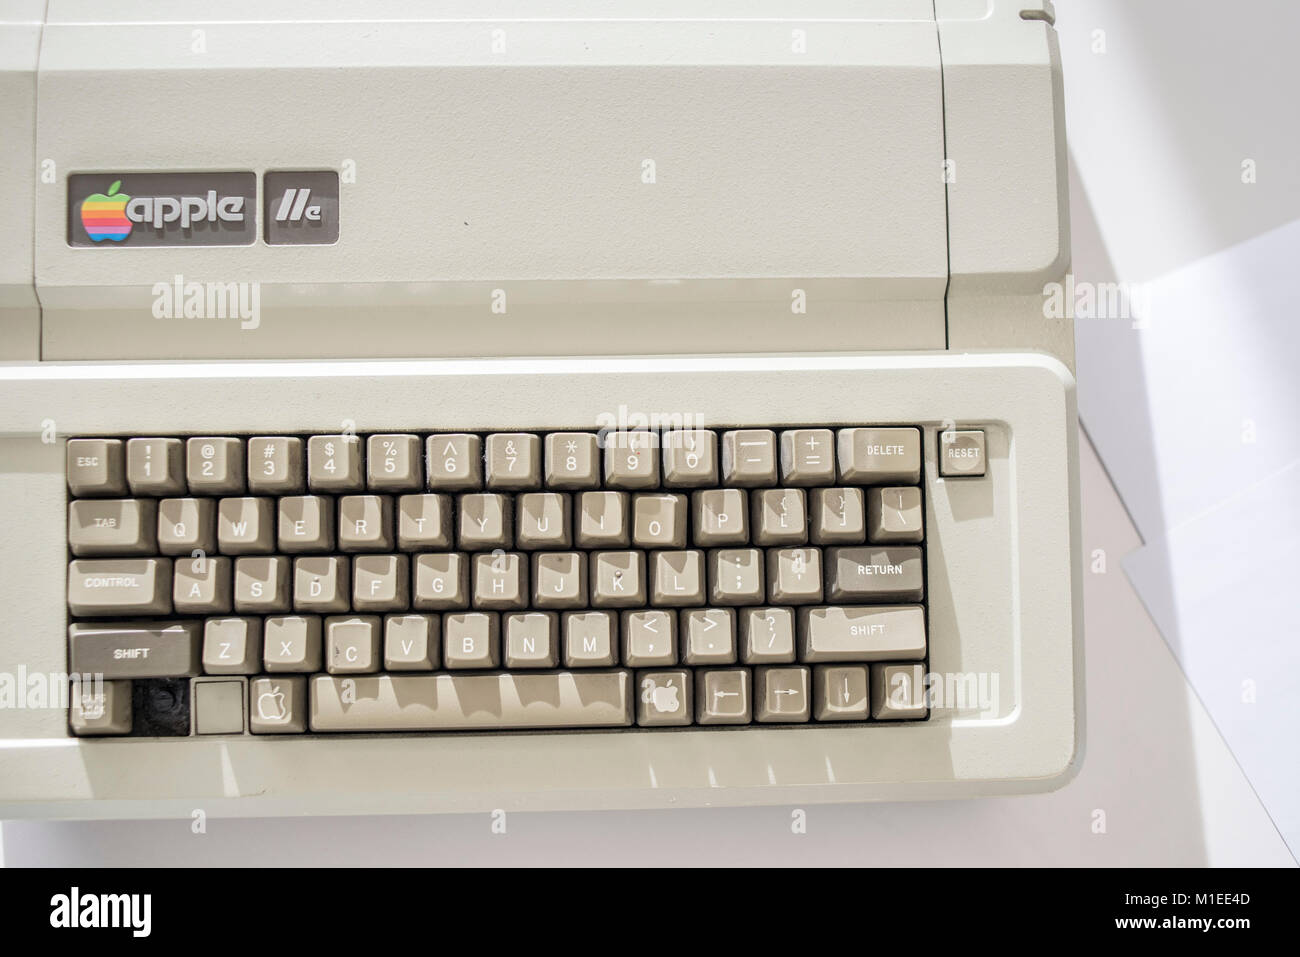 Apple IIe; release date January 1983; exhibited at MacPaw's Ukrainian Apple Museum in Kiev; Ukraine on January 26; 2017. Ukrainian developer MacPaw has opened Apple hardware museum at the company’s office in Kiev. The collection has more than 70 original Macintosh models dated from 1981 to 2017. Stock Photo